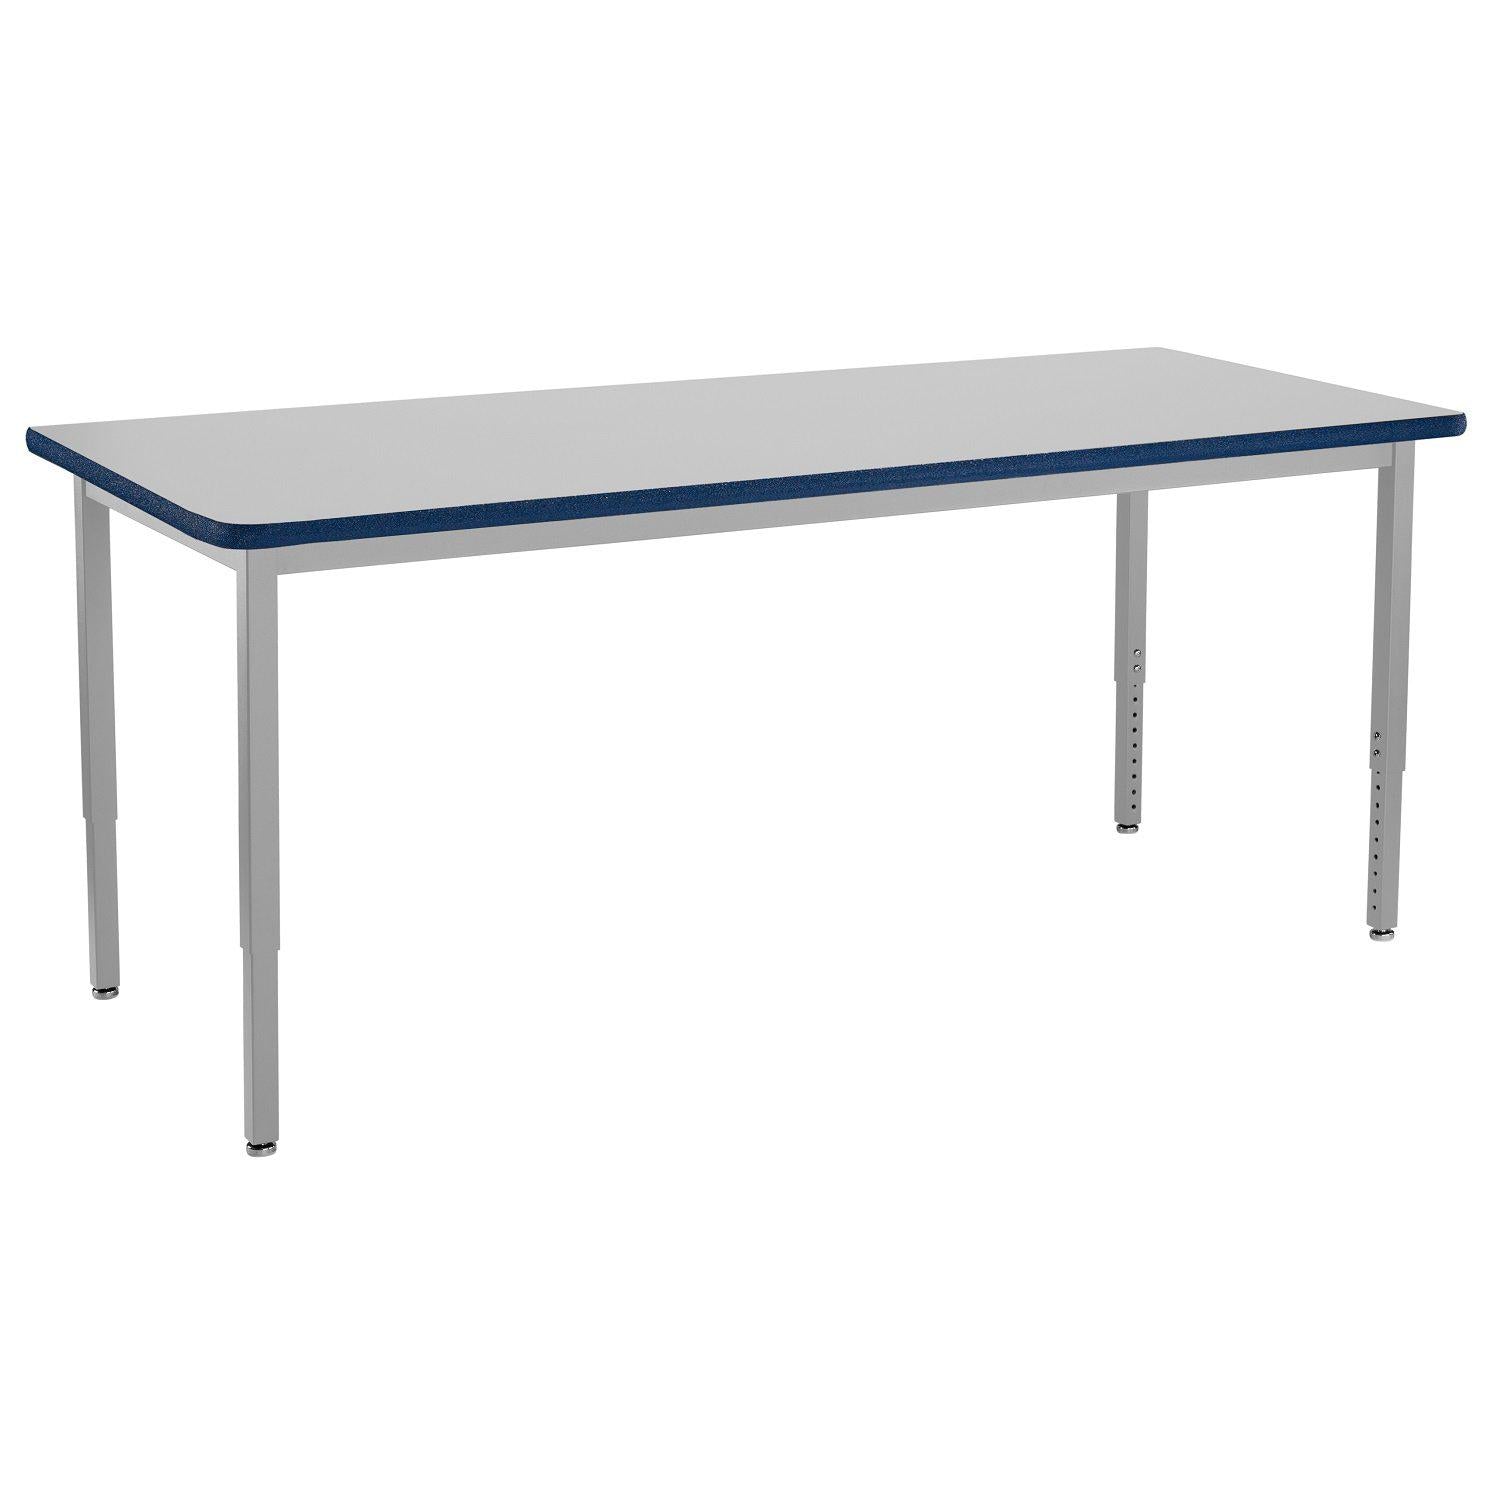 Heavy-Duty Height-Adjustable Utility Table, Soft Grey Frame, 30" x 96", Supreme High-Pressure Laminate Top with Black ProtectEdge